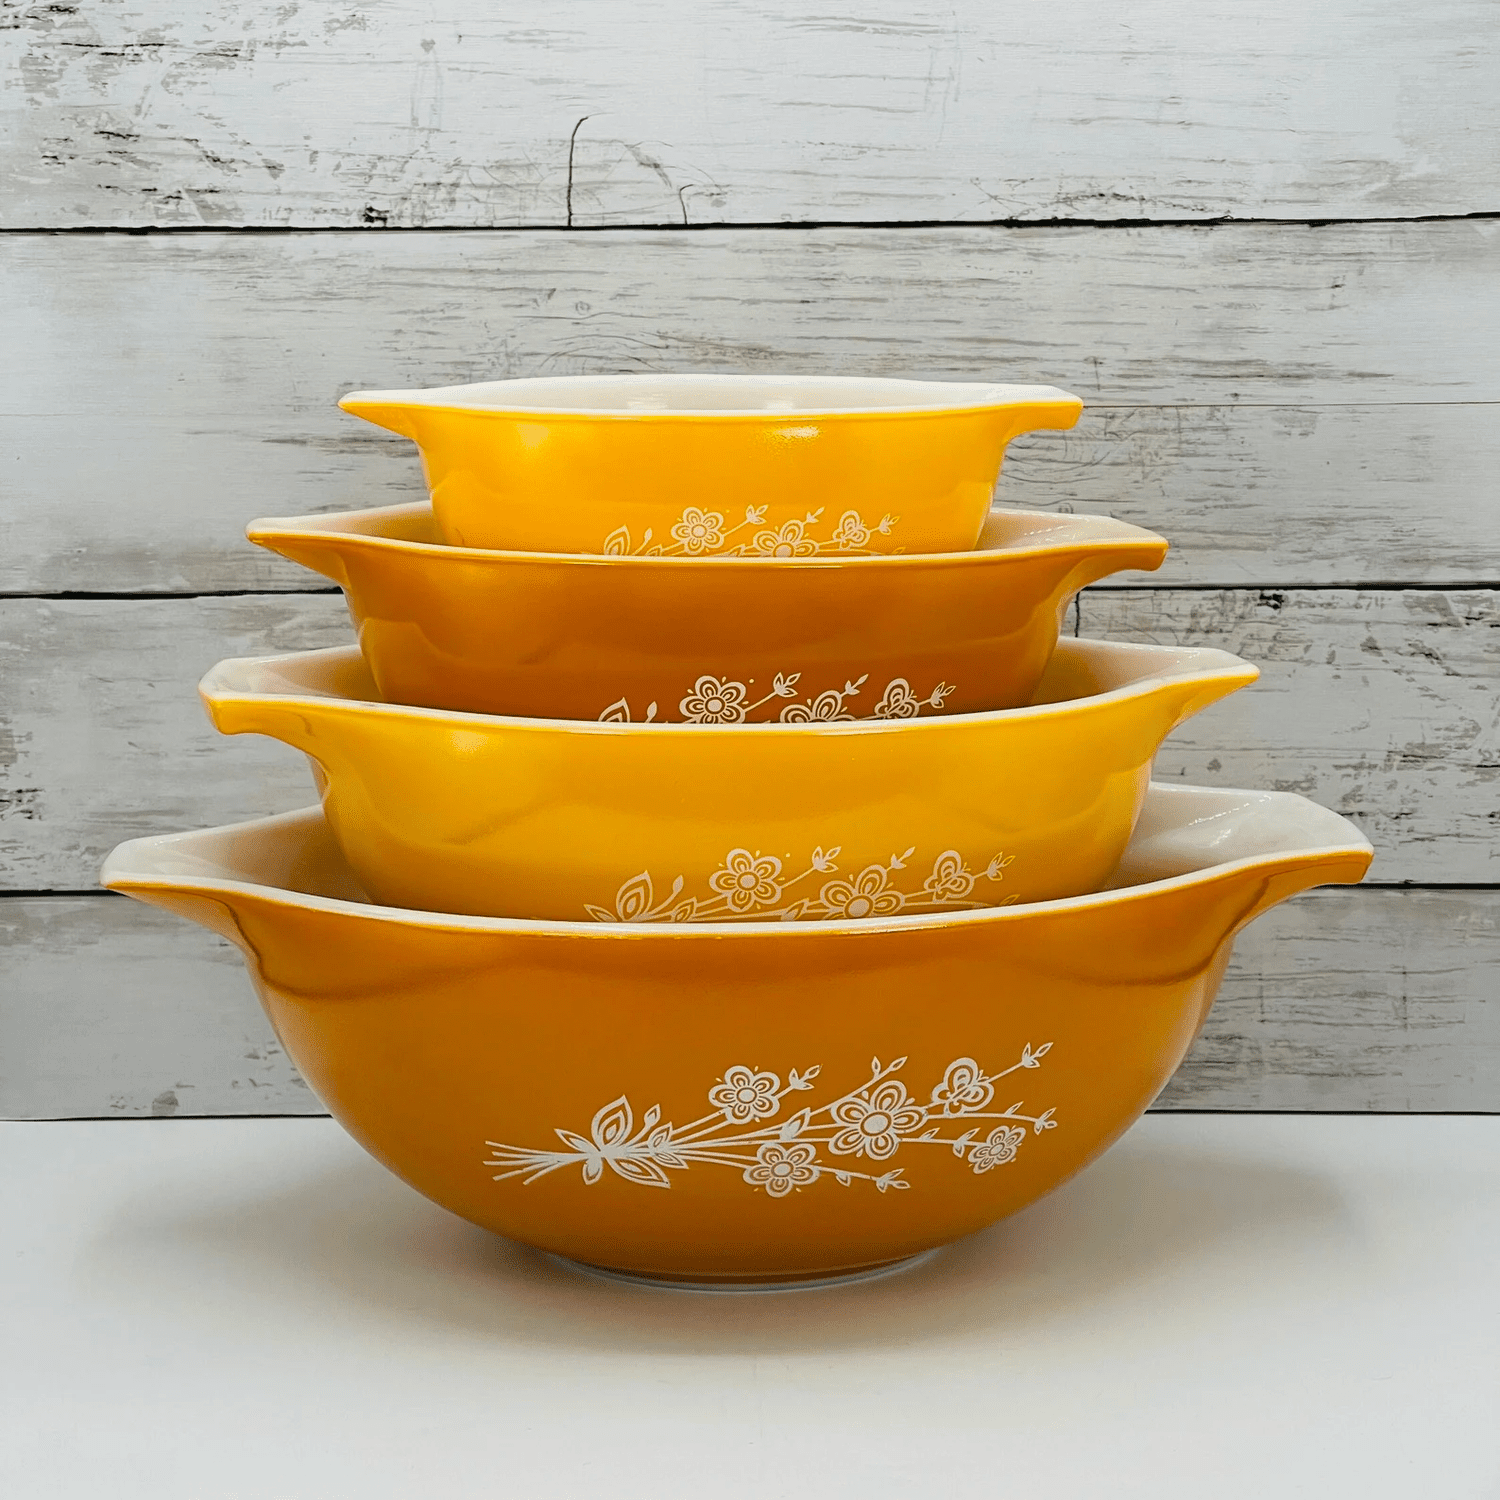 Your Guide to Vintage Pyrex Mixing Bowl Patterns